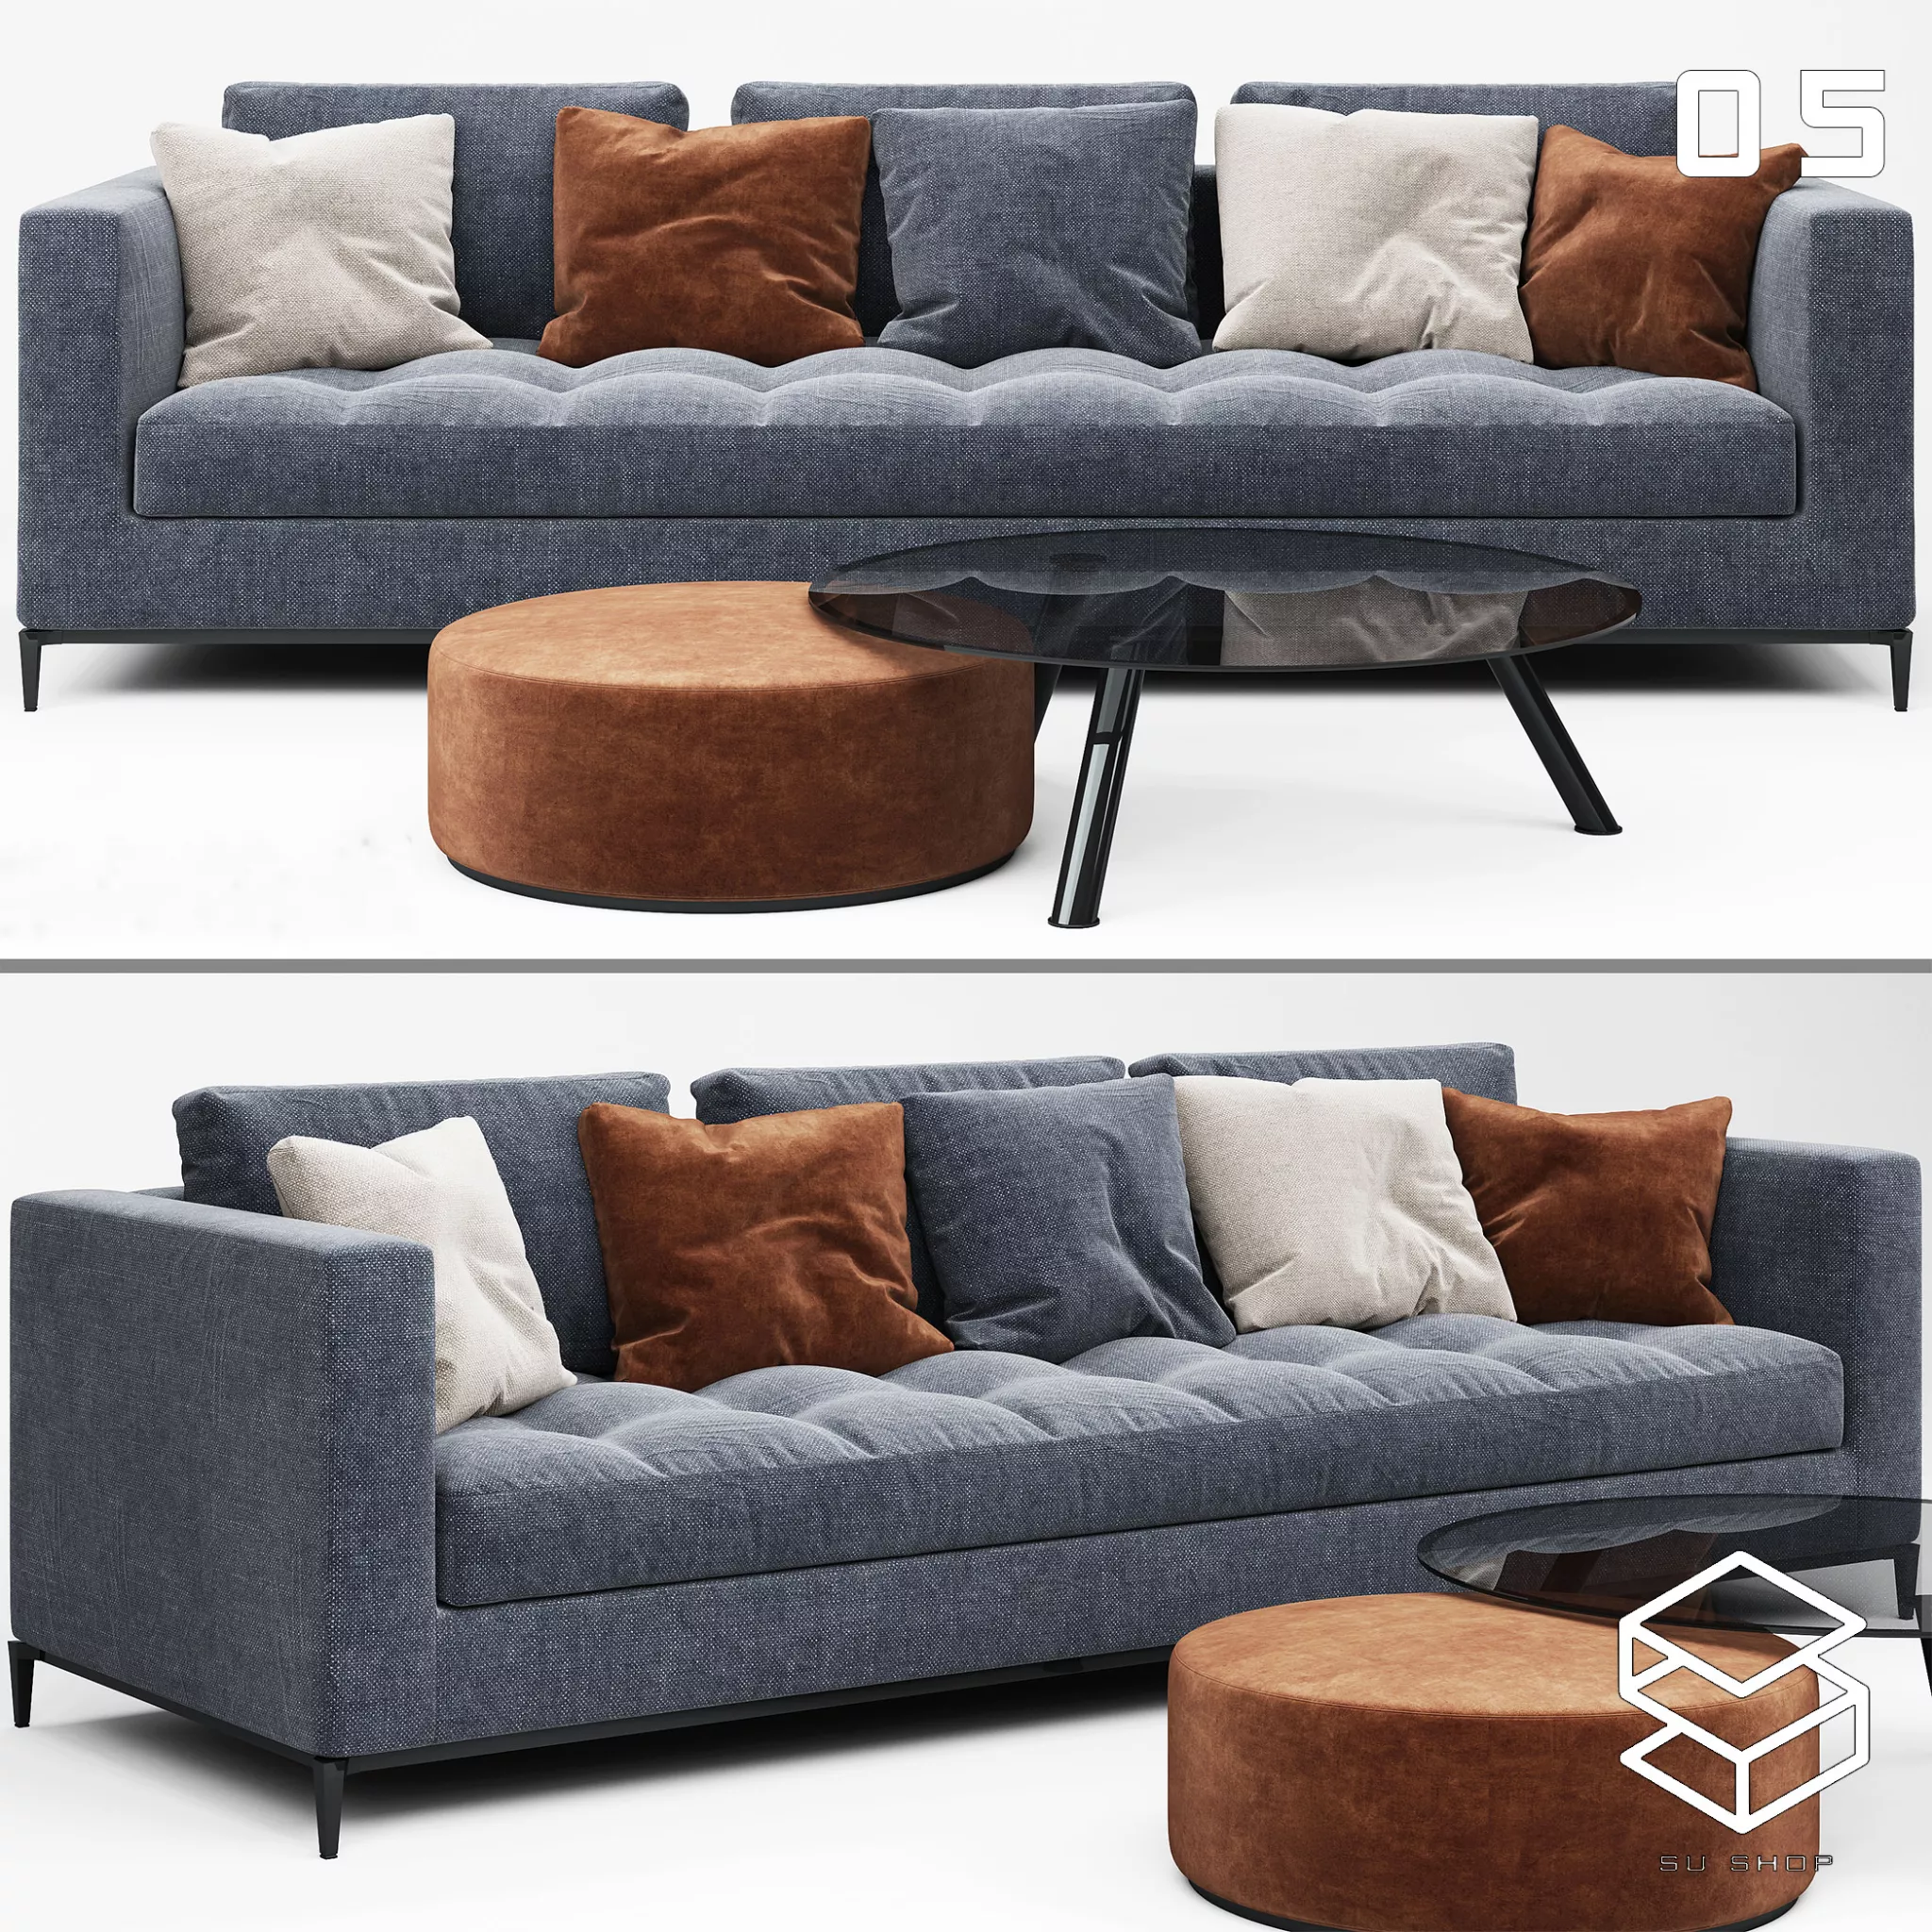 MODERN SOFA - SKETCHUP 3D MODEL - VRAY OR ENSCAPE - ID13674